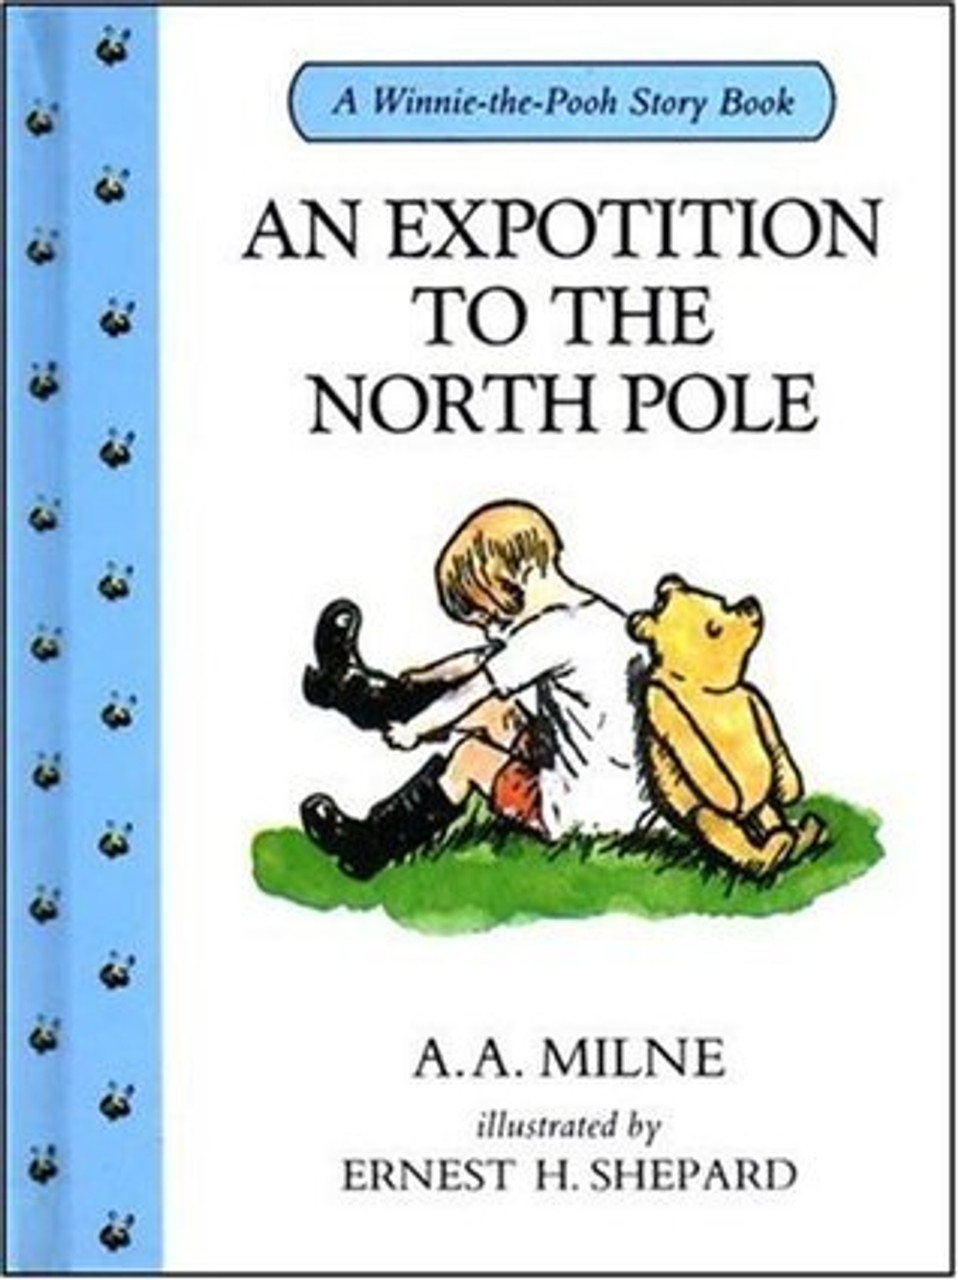 A.A. Milne / An Expotition to the North Pole